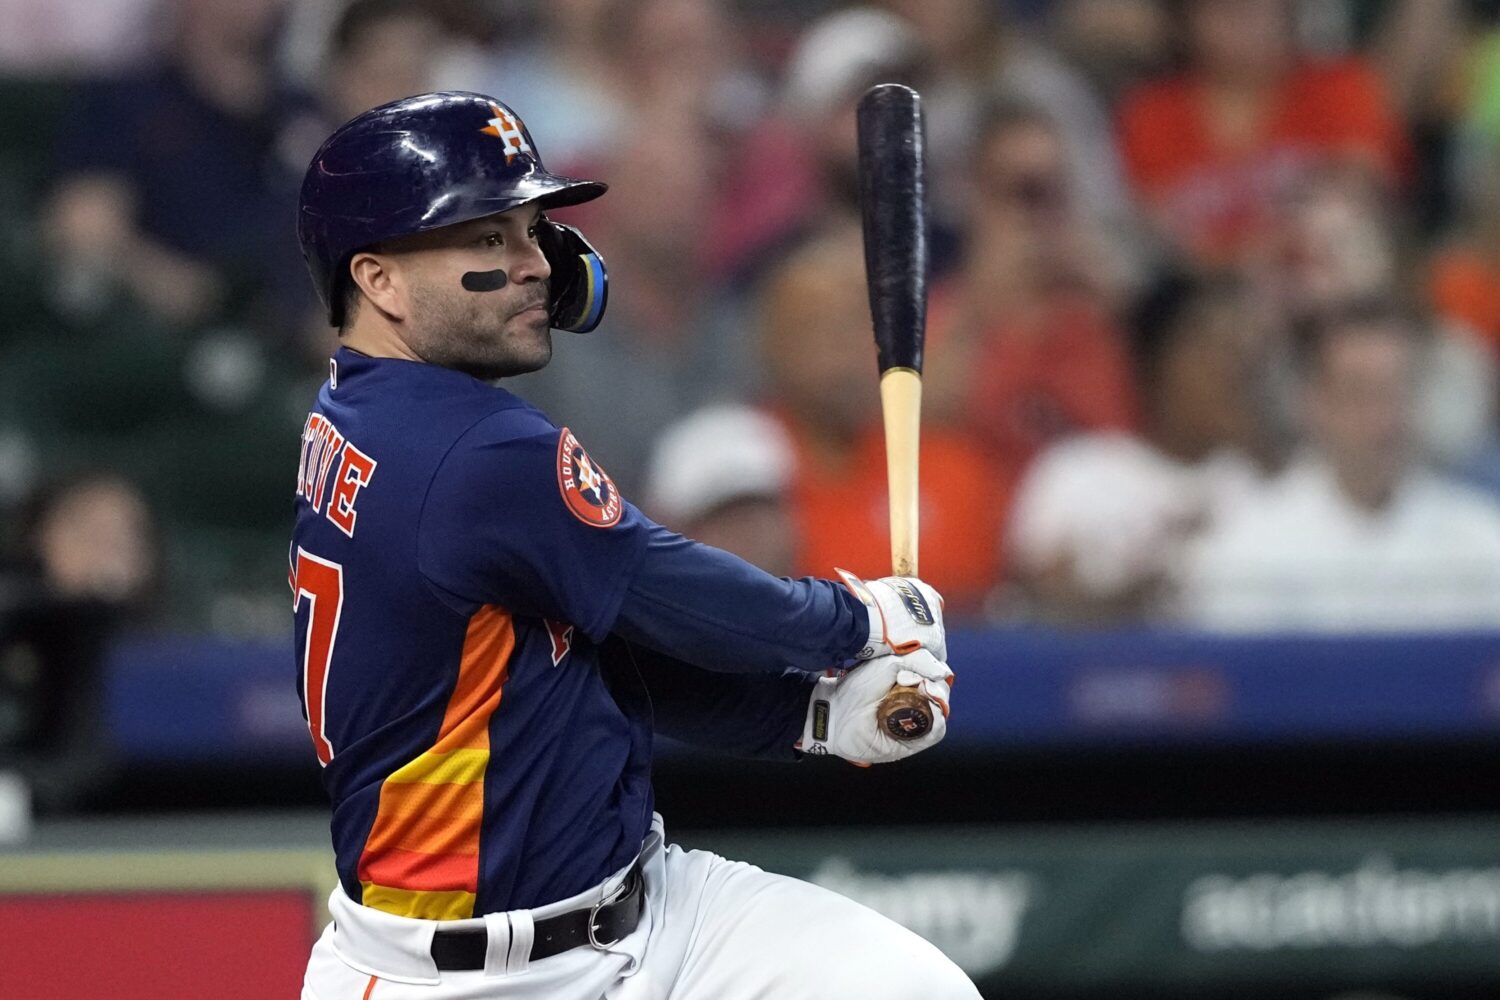 How tall is the Houston Astros Jose Altuve?